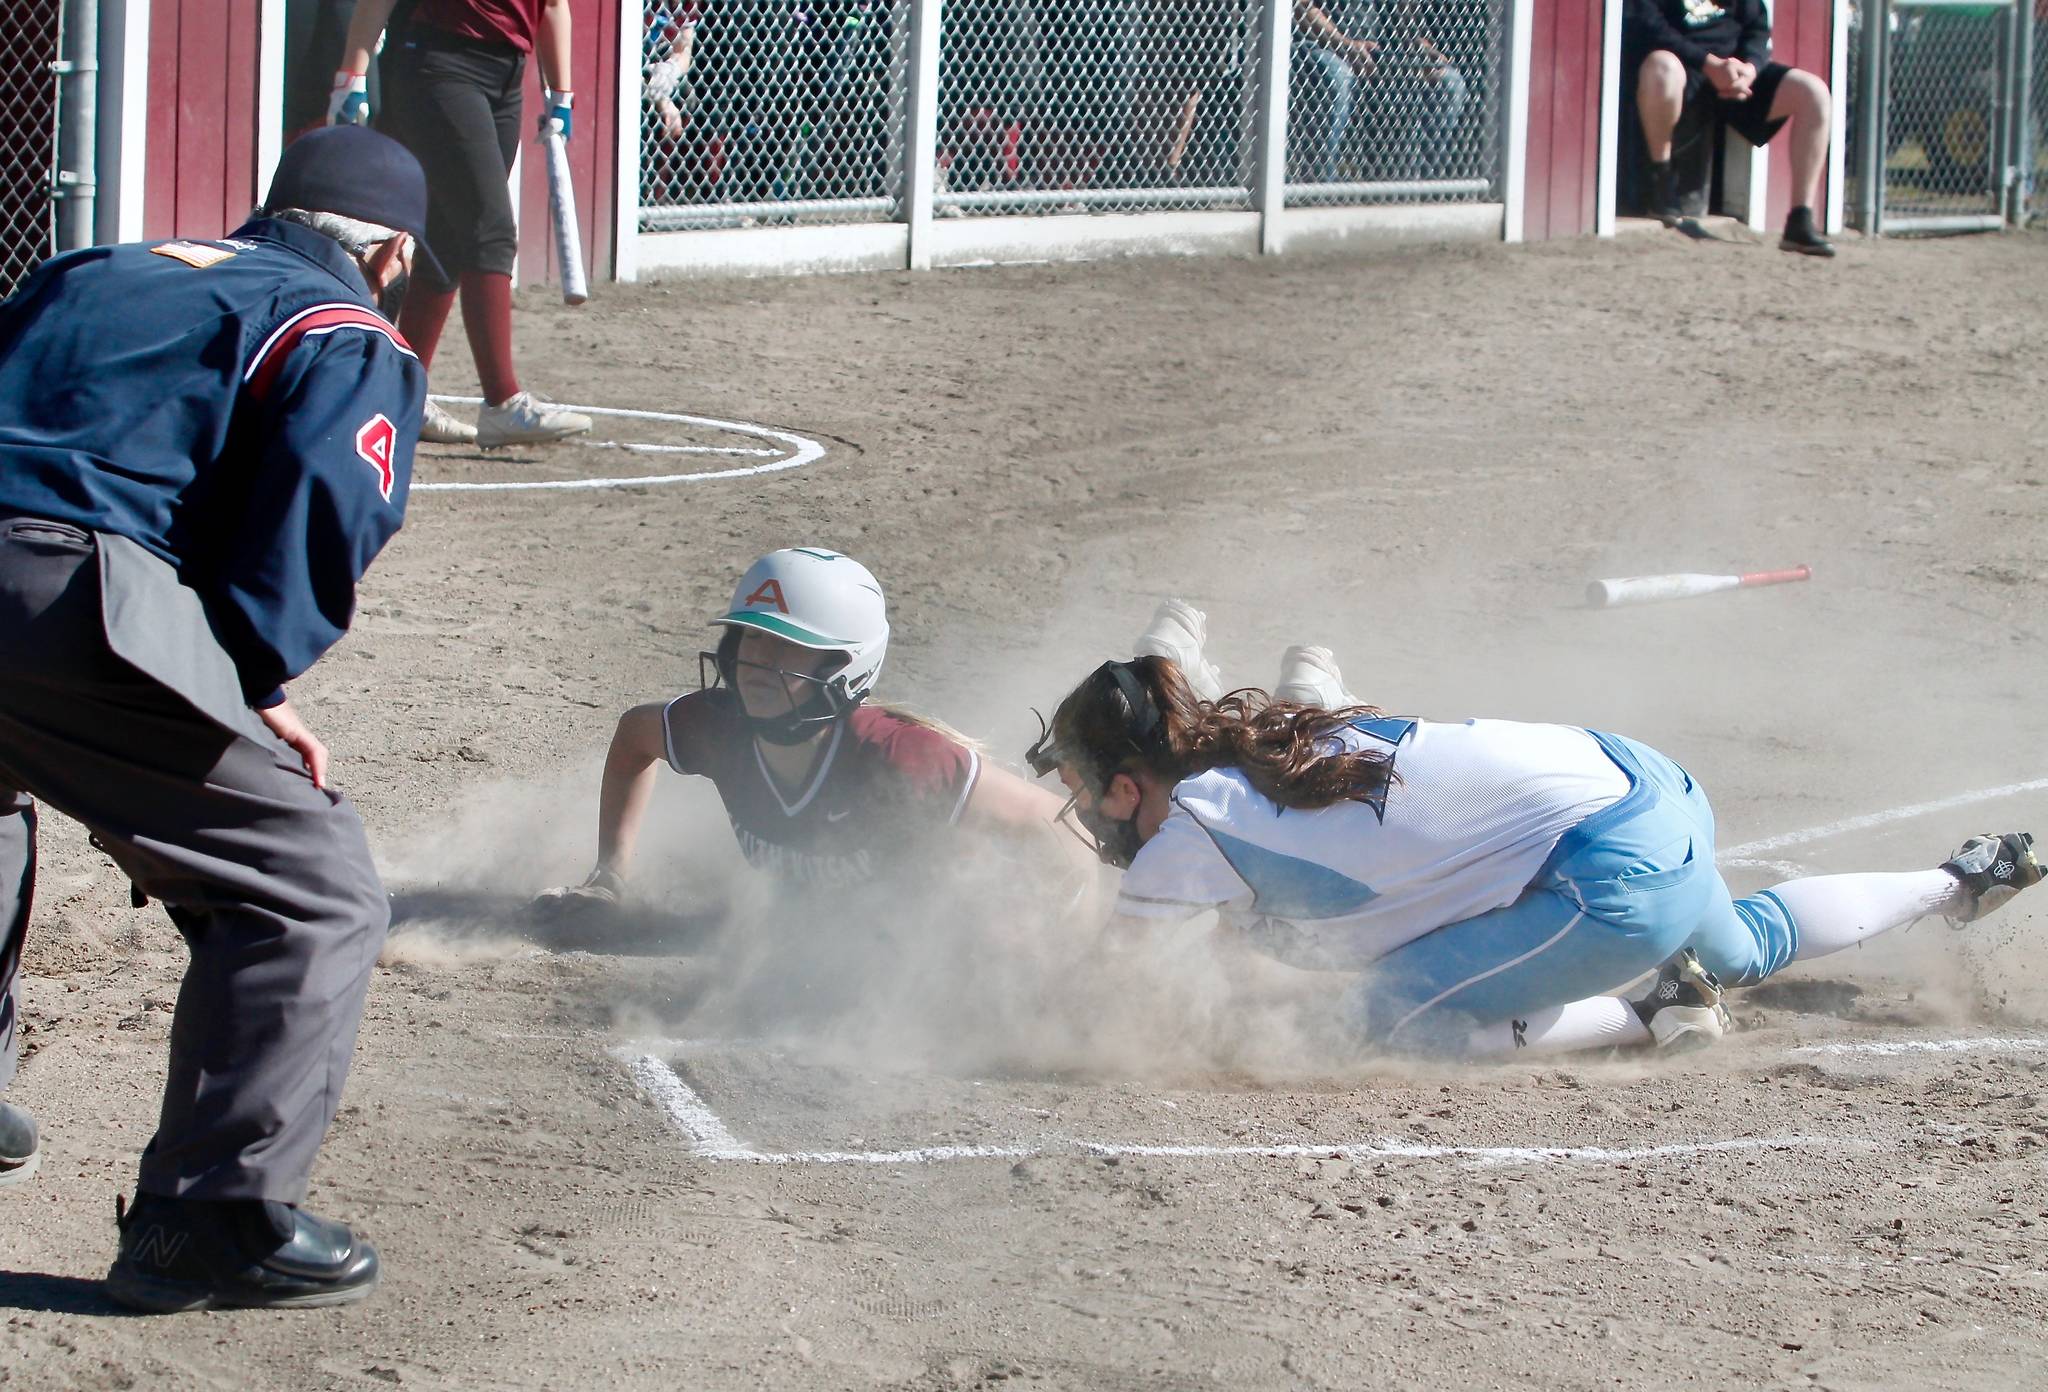 Marisol Bergstrom slides in ahead of the throw to score one of her four runs against Gig Harbor. (Mark Krulish | Kitsap News Group)